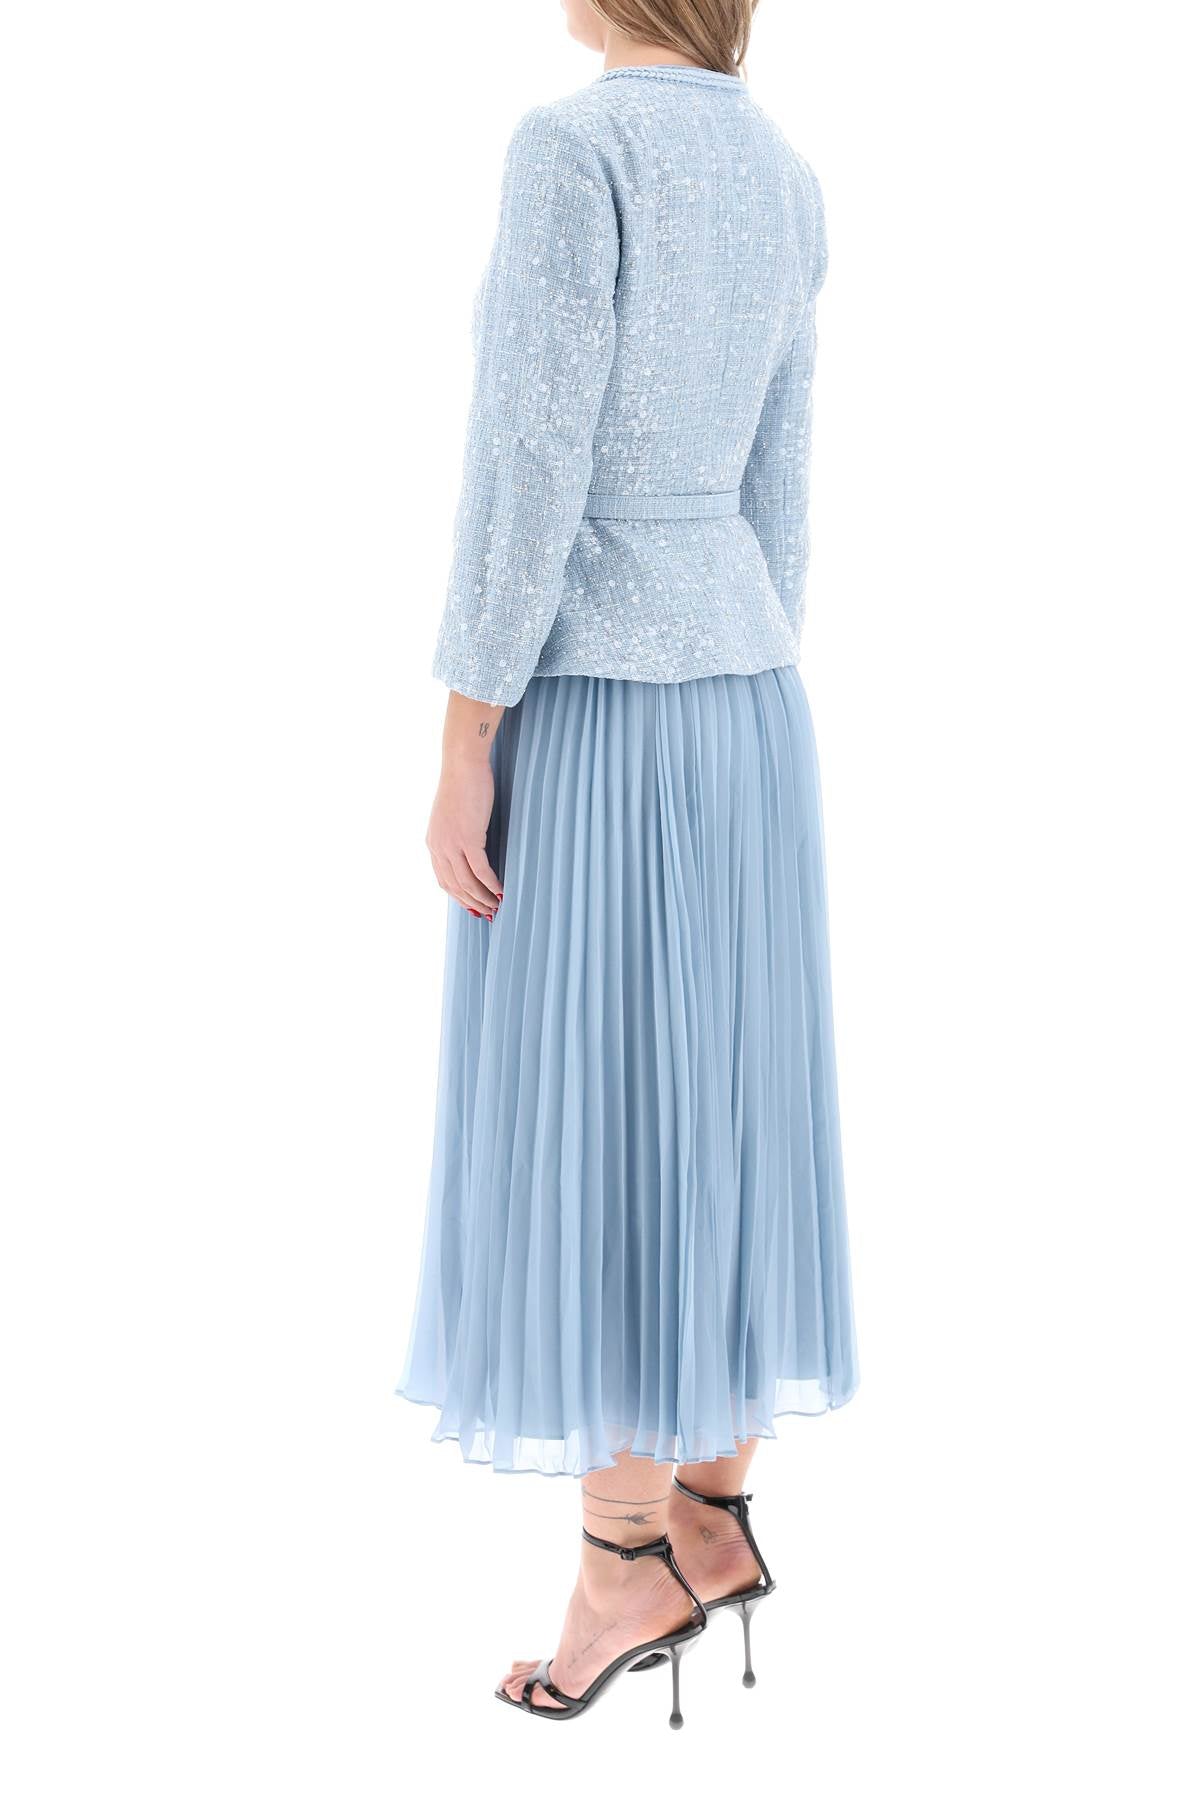 SELF-PORTRAIT Light Blue Pleated Midi Dress with Sequin Tweed Bodice and Braided Trims